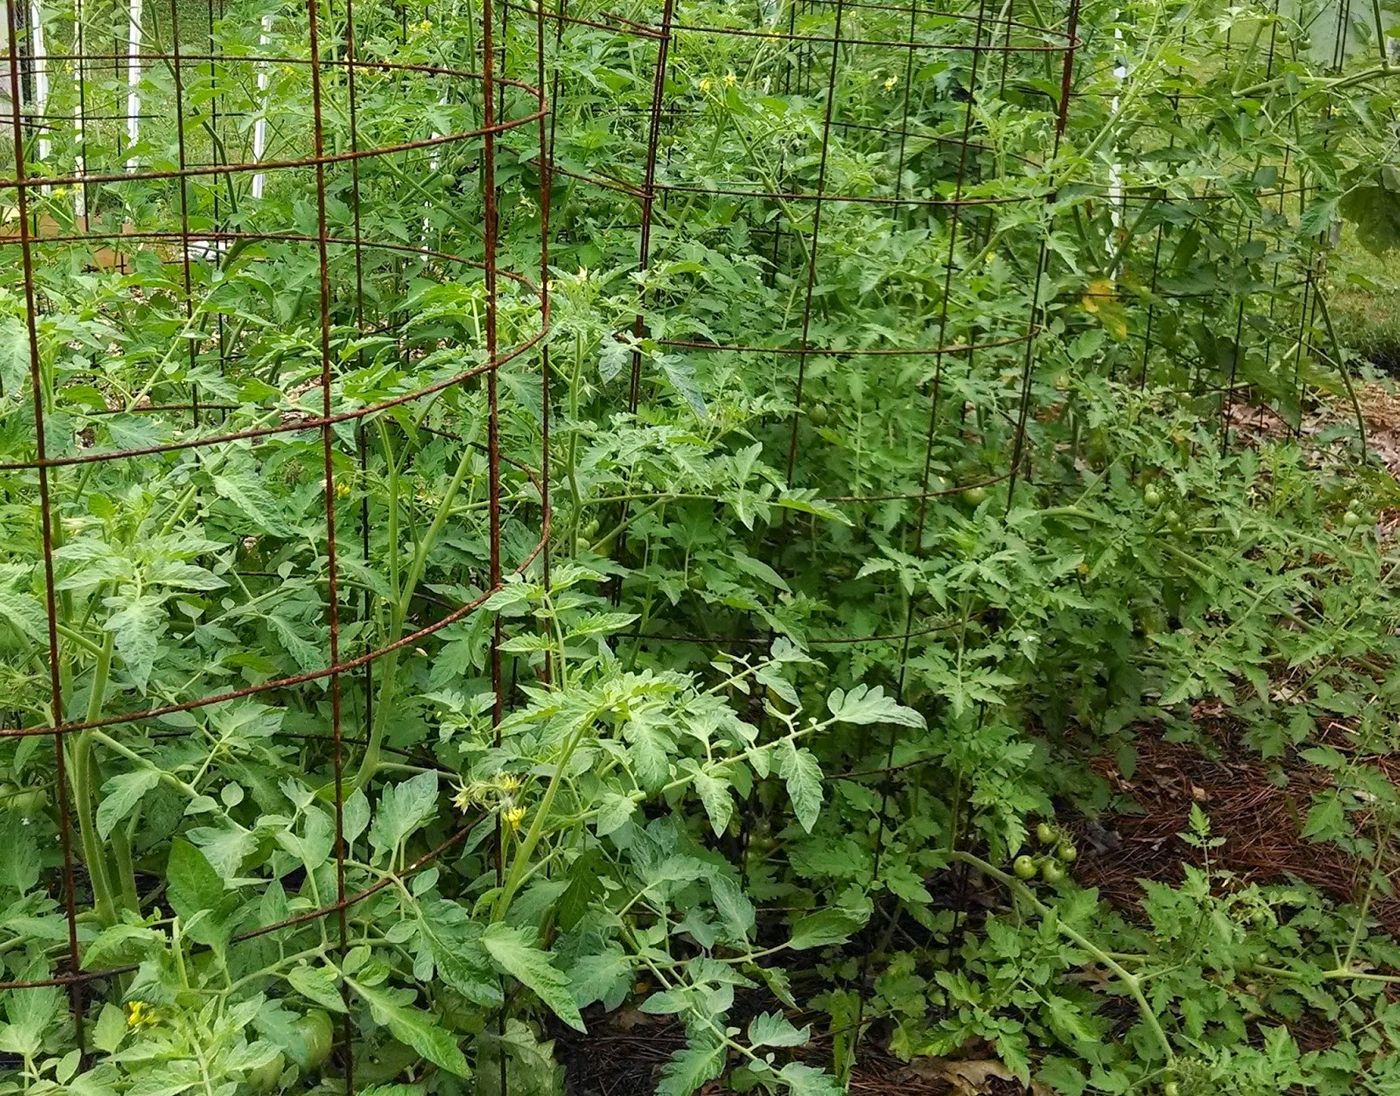 An example of denser and more compact tomato plants that with the addition of CRIPSR editing creates a higher yield.